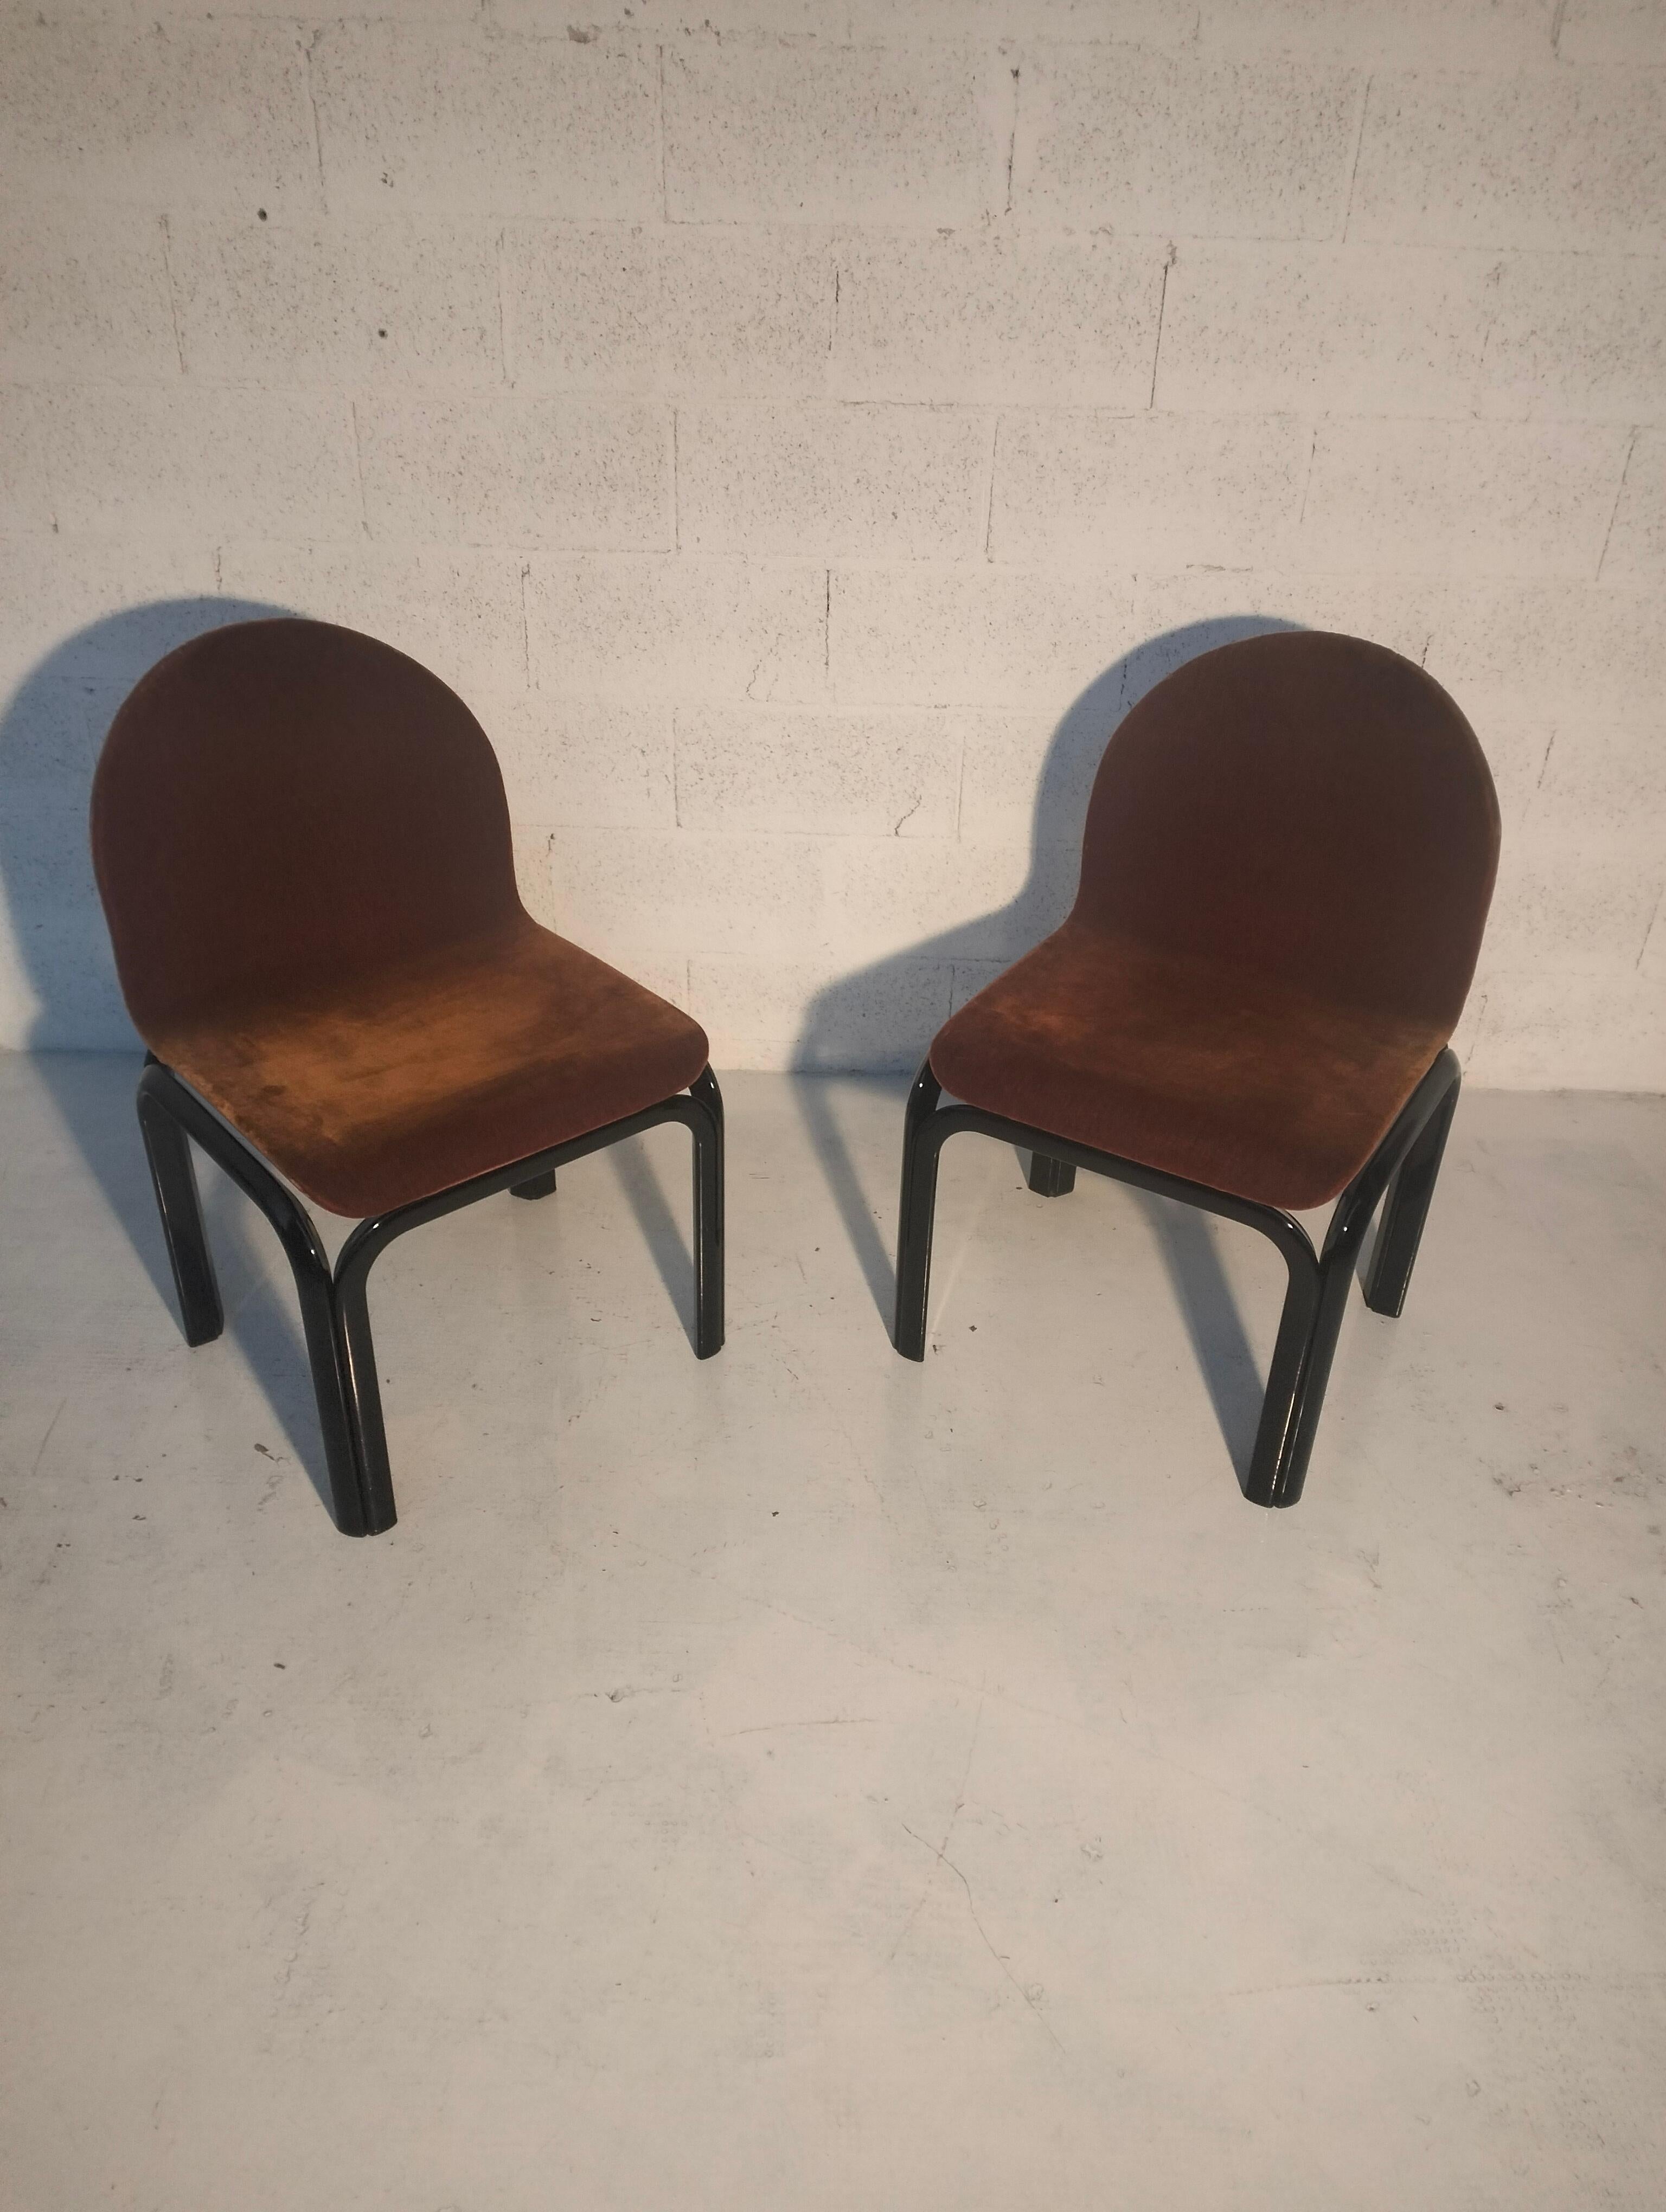 Set of 4 chairs and 1 square table Orsay mod. by Gae Aulenti for Knoll 80s For Sale 8